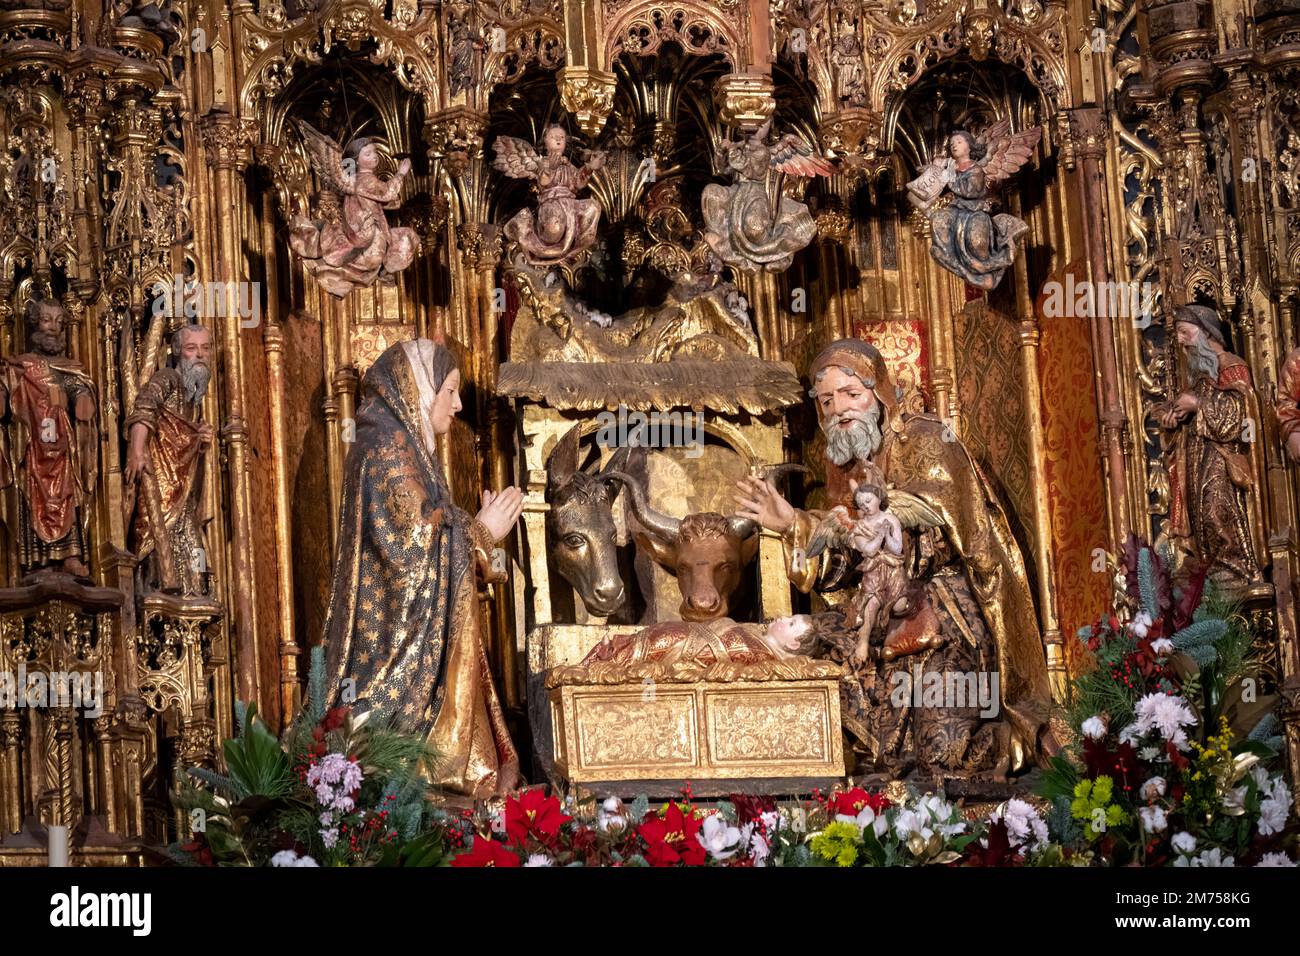 A close up detail of the main altar within the Cathedral of Seville Stock Photo